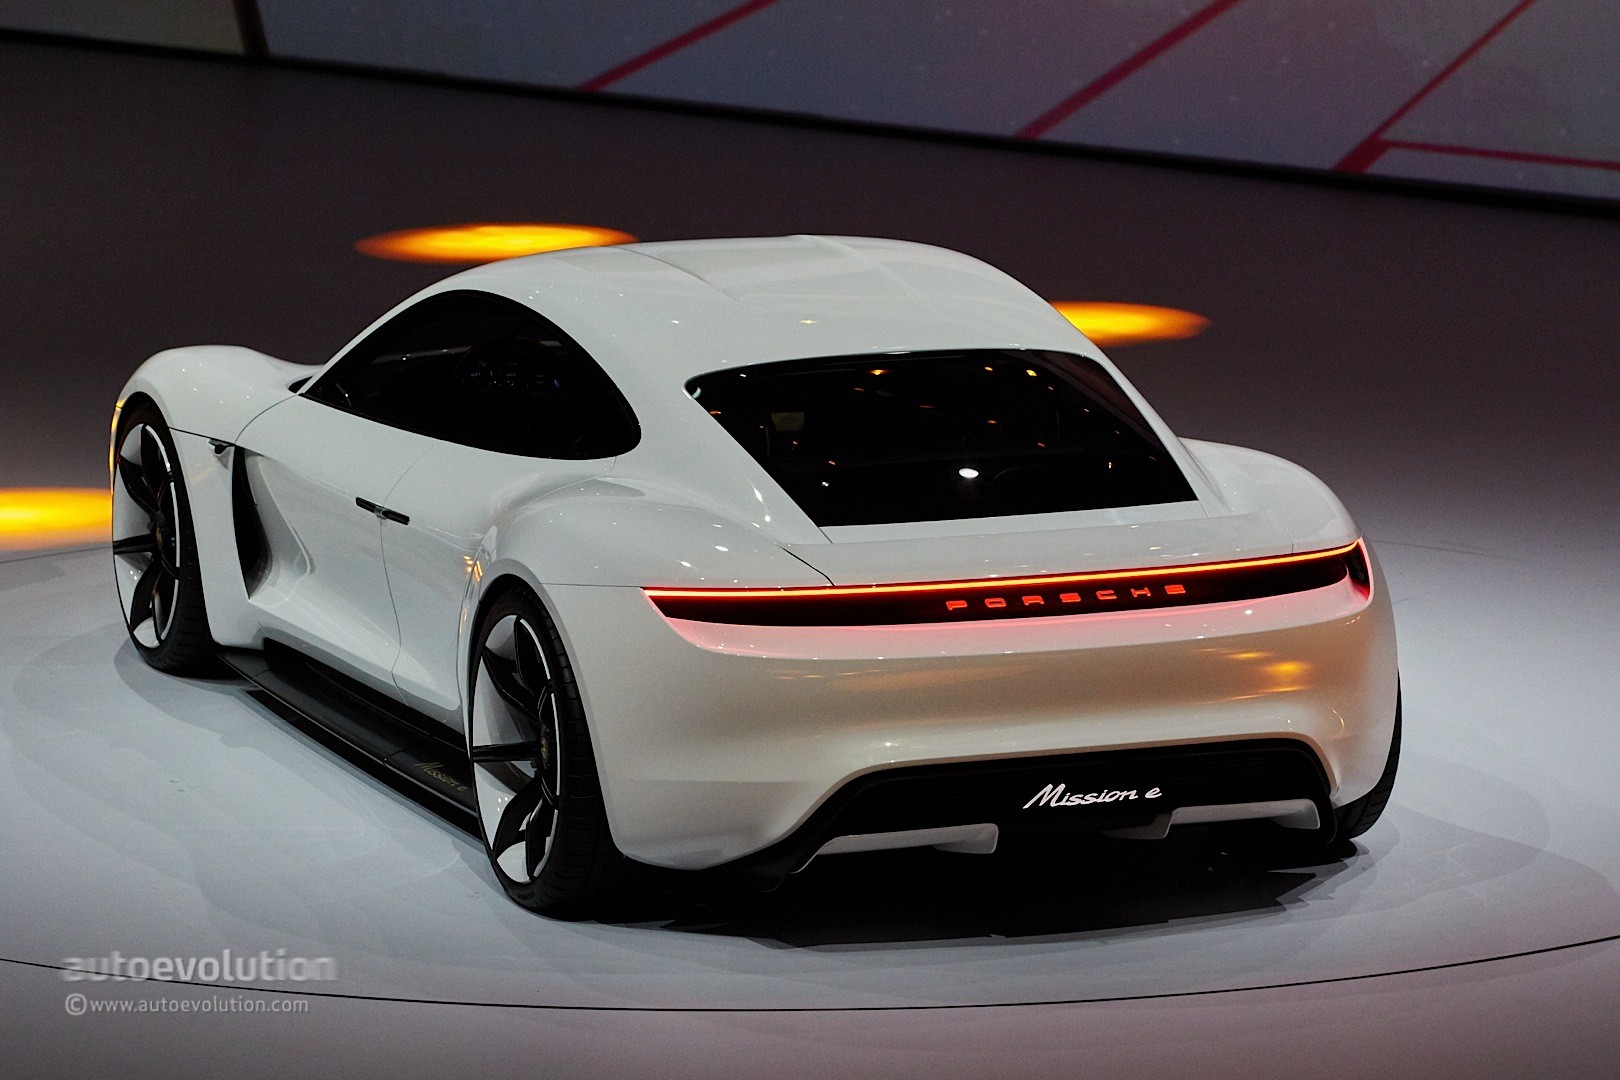 Porsche Mission E Renamed Taycan, Electric Car to Launch in 2019